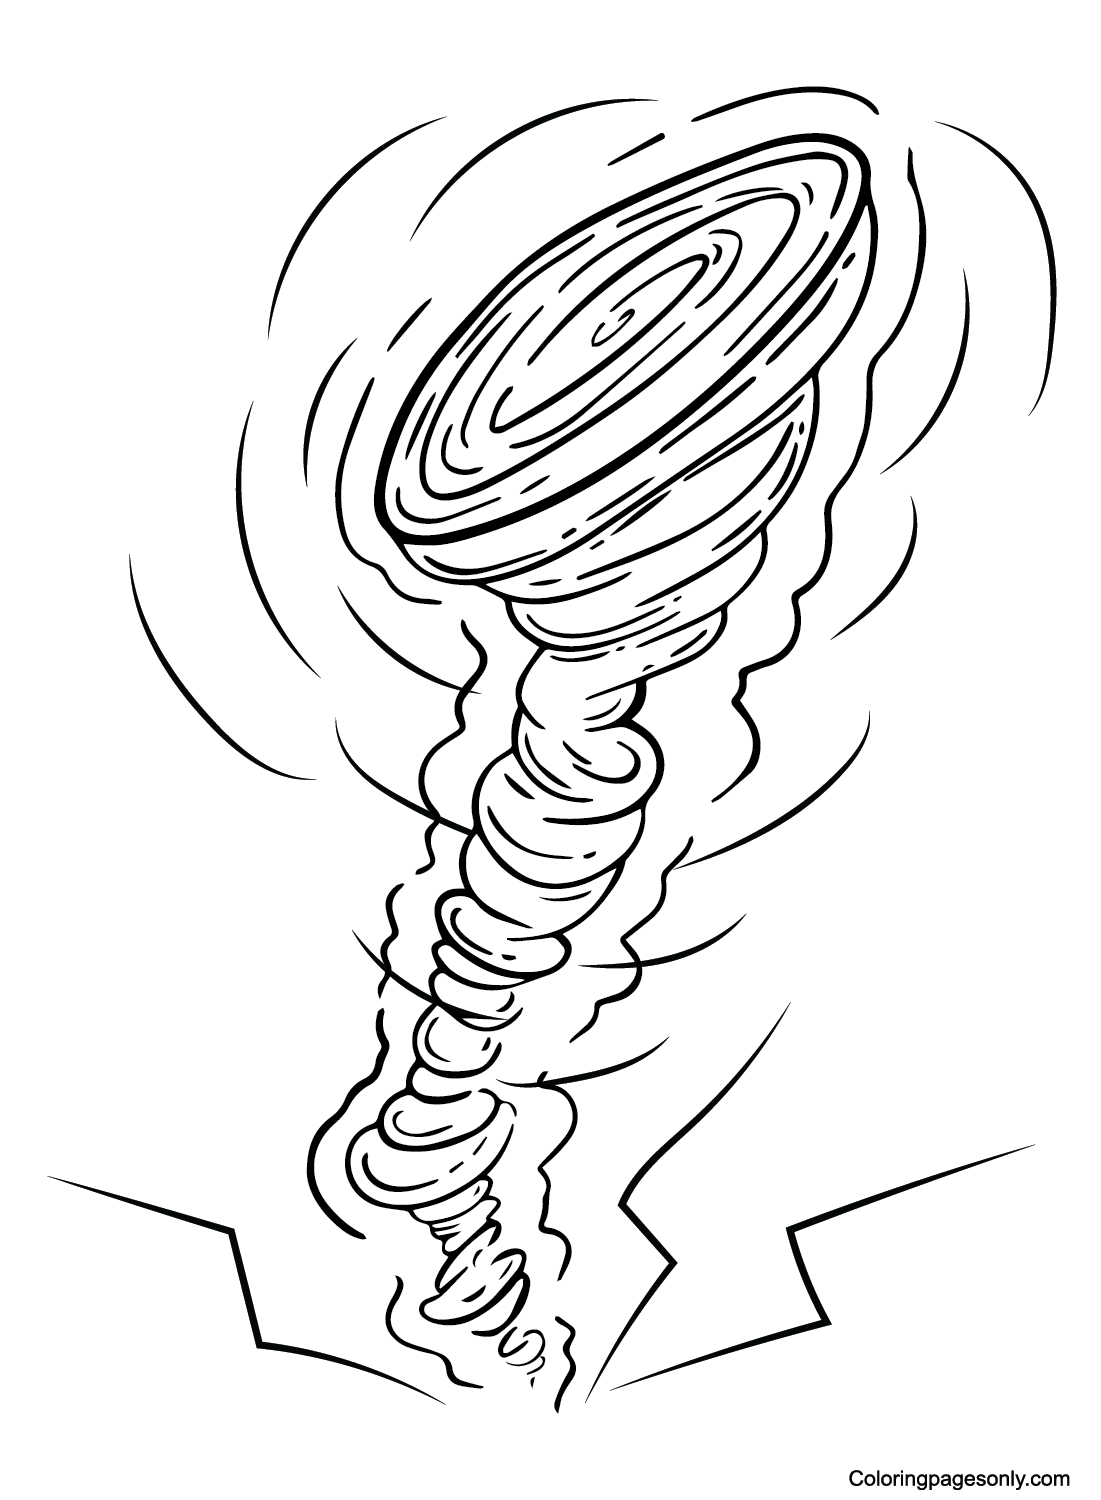 Pictures Tornado Coloring Page